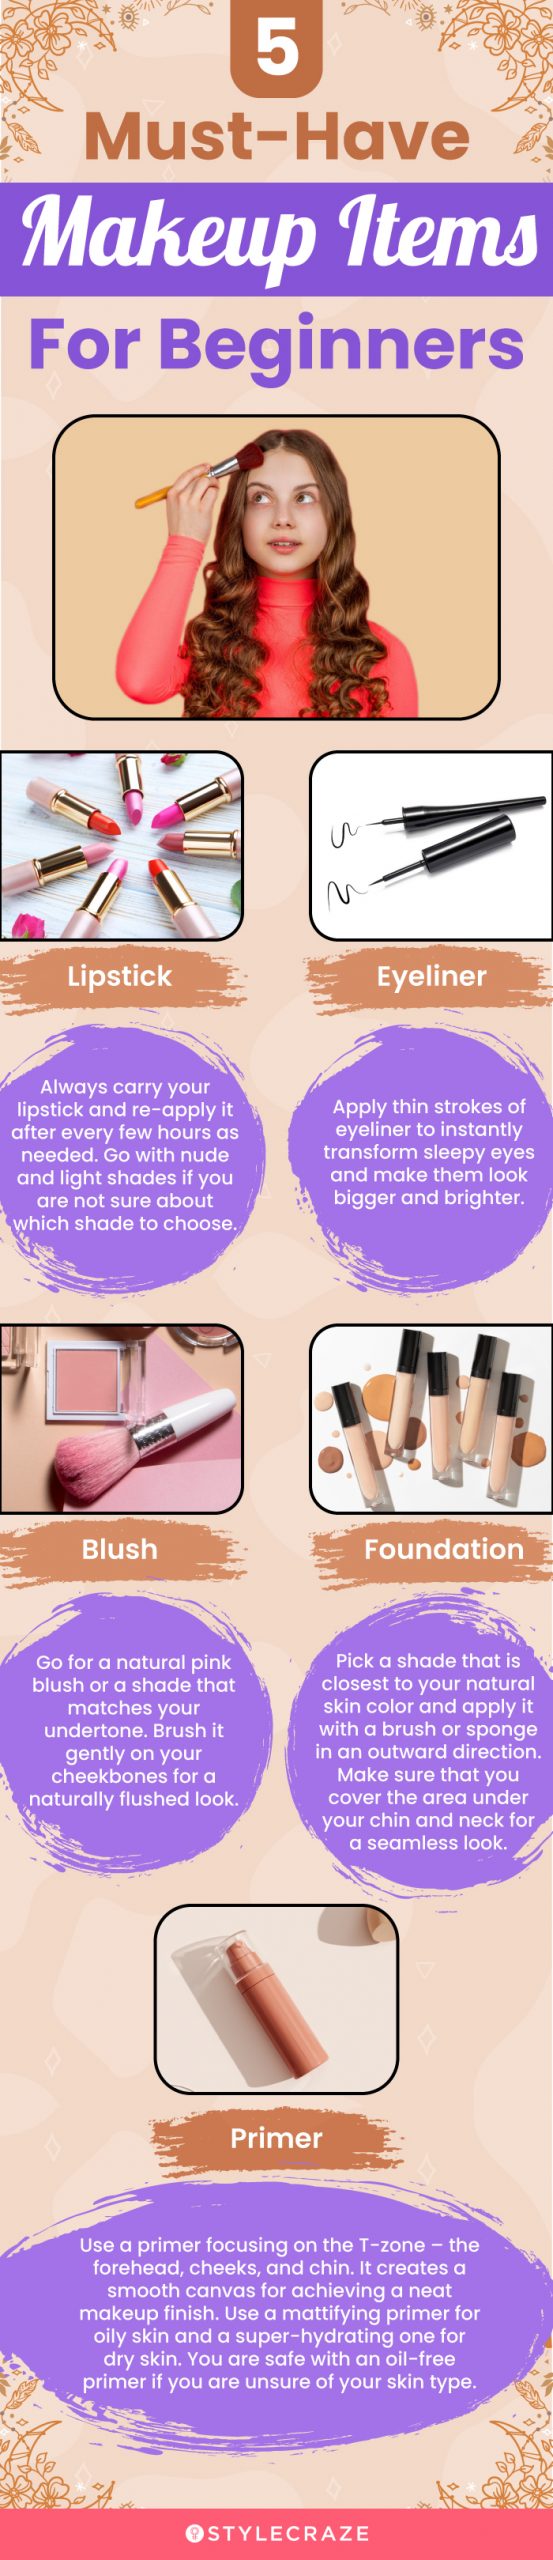 5 Must-Have Makeup Items For Beginners (infographic)